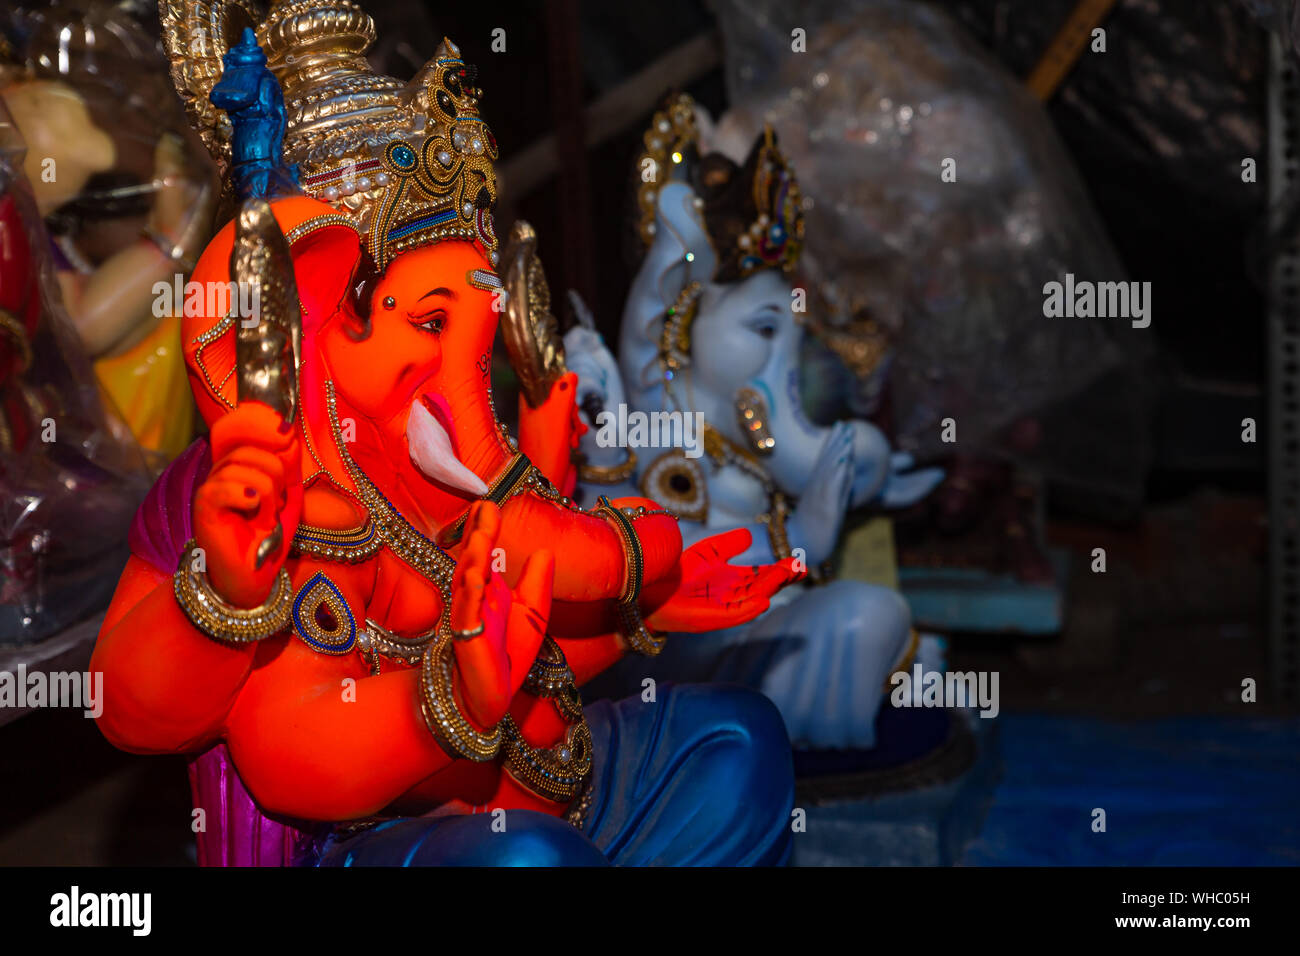 Pune Ganesh Festival High Resolution Stock Photography and Images - Alamy